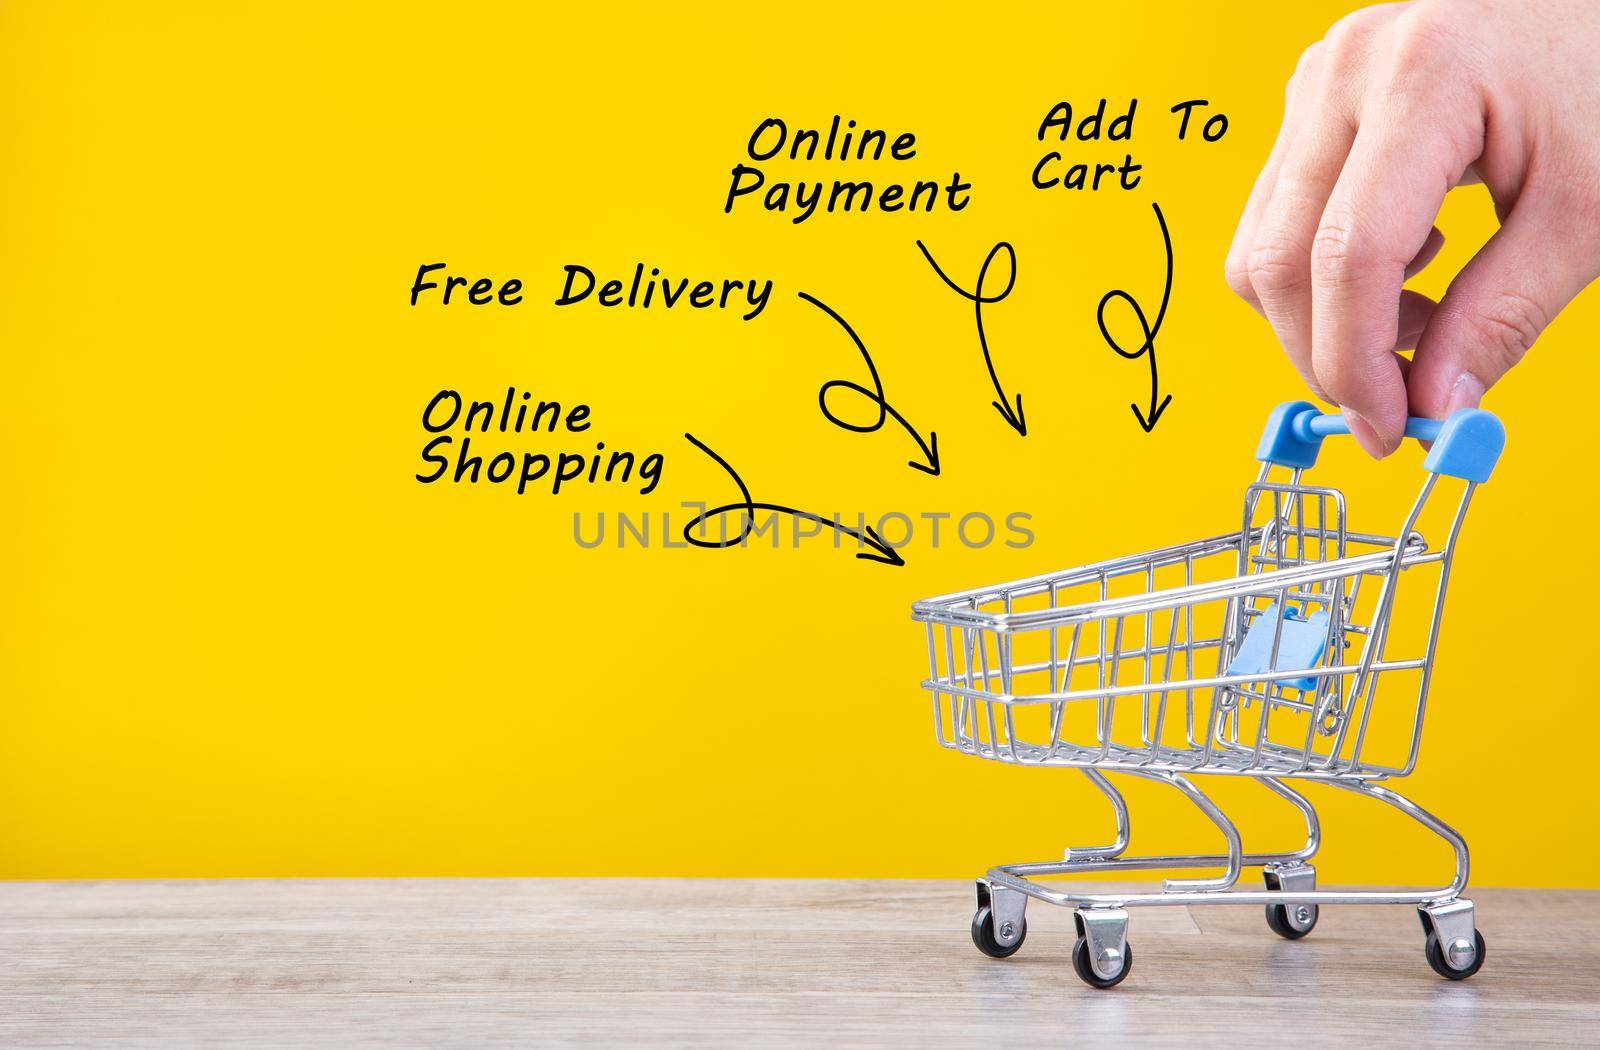 Online Shopping Conceptual - Hand pushing a shopping cart by tehcheesiong